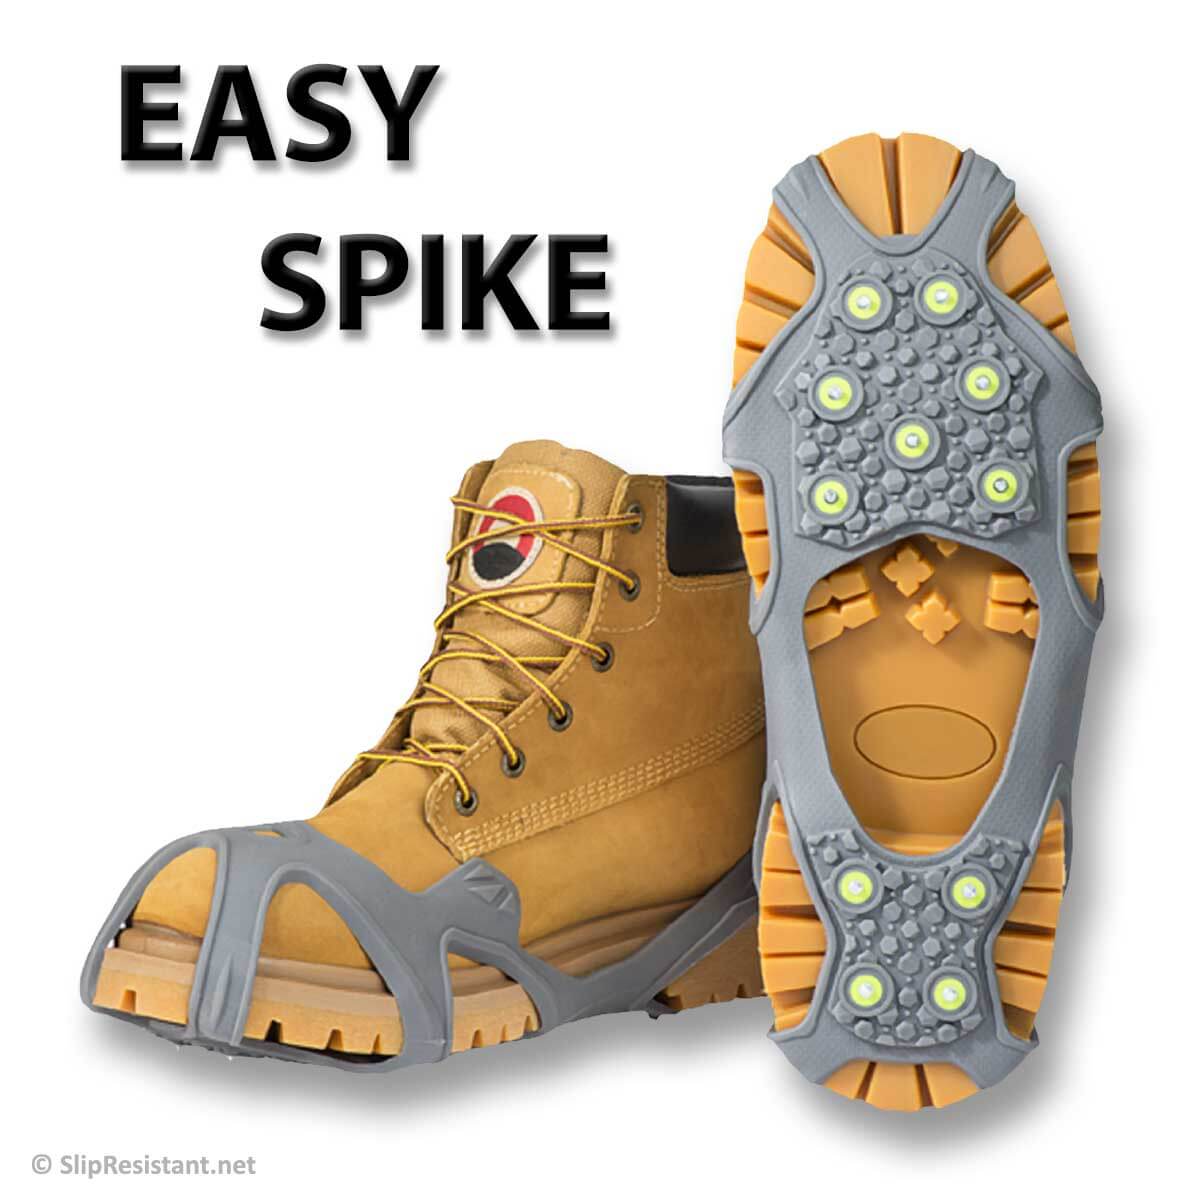 Winter Walking EASY SPIKE Ice Cleats for Shoes and Boots.